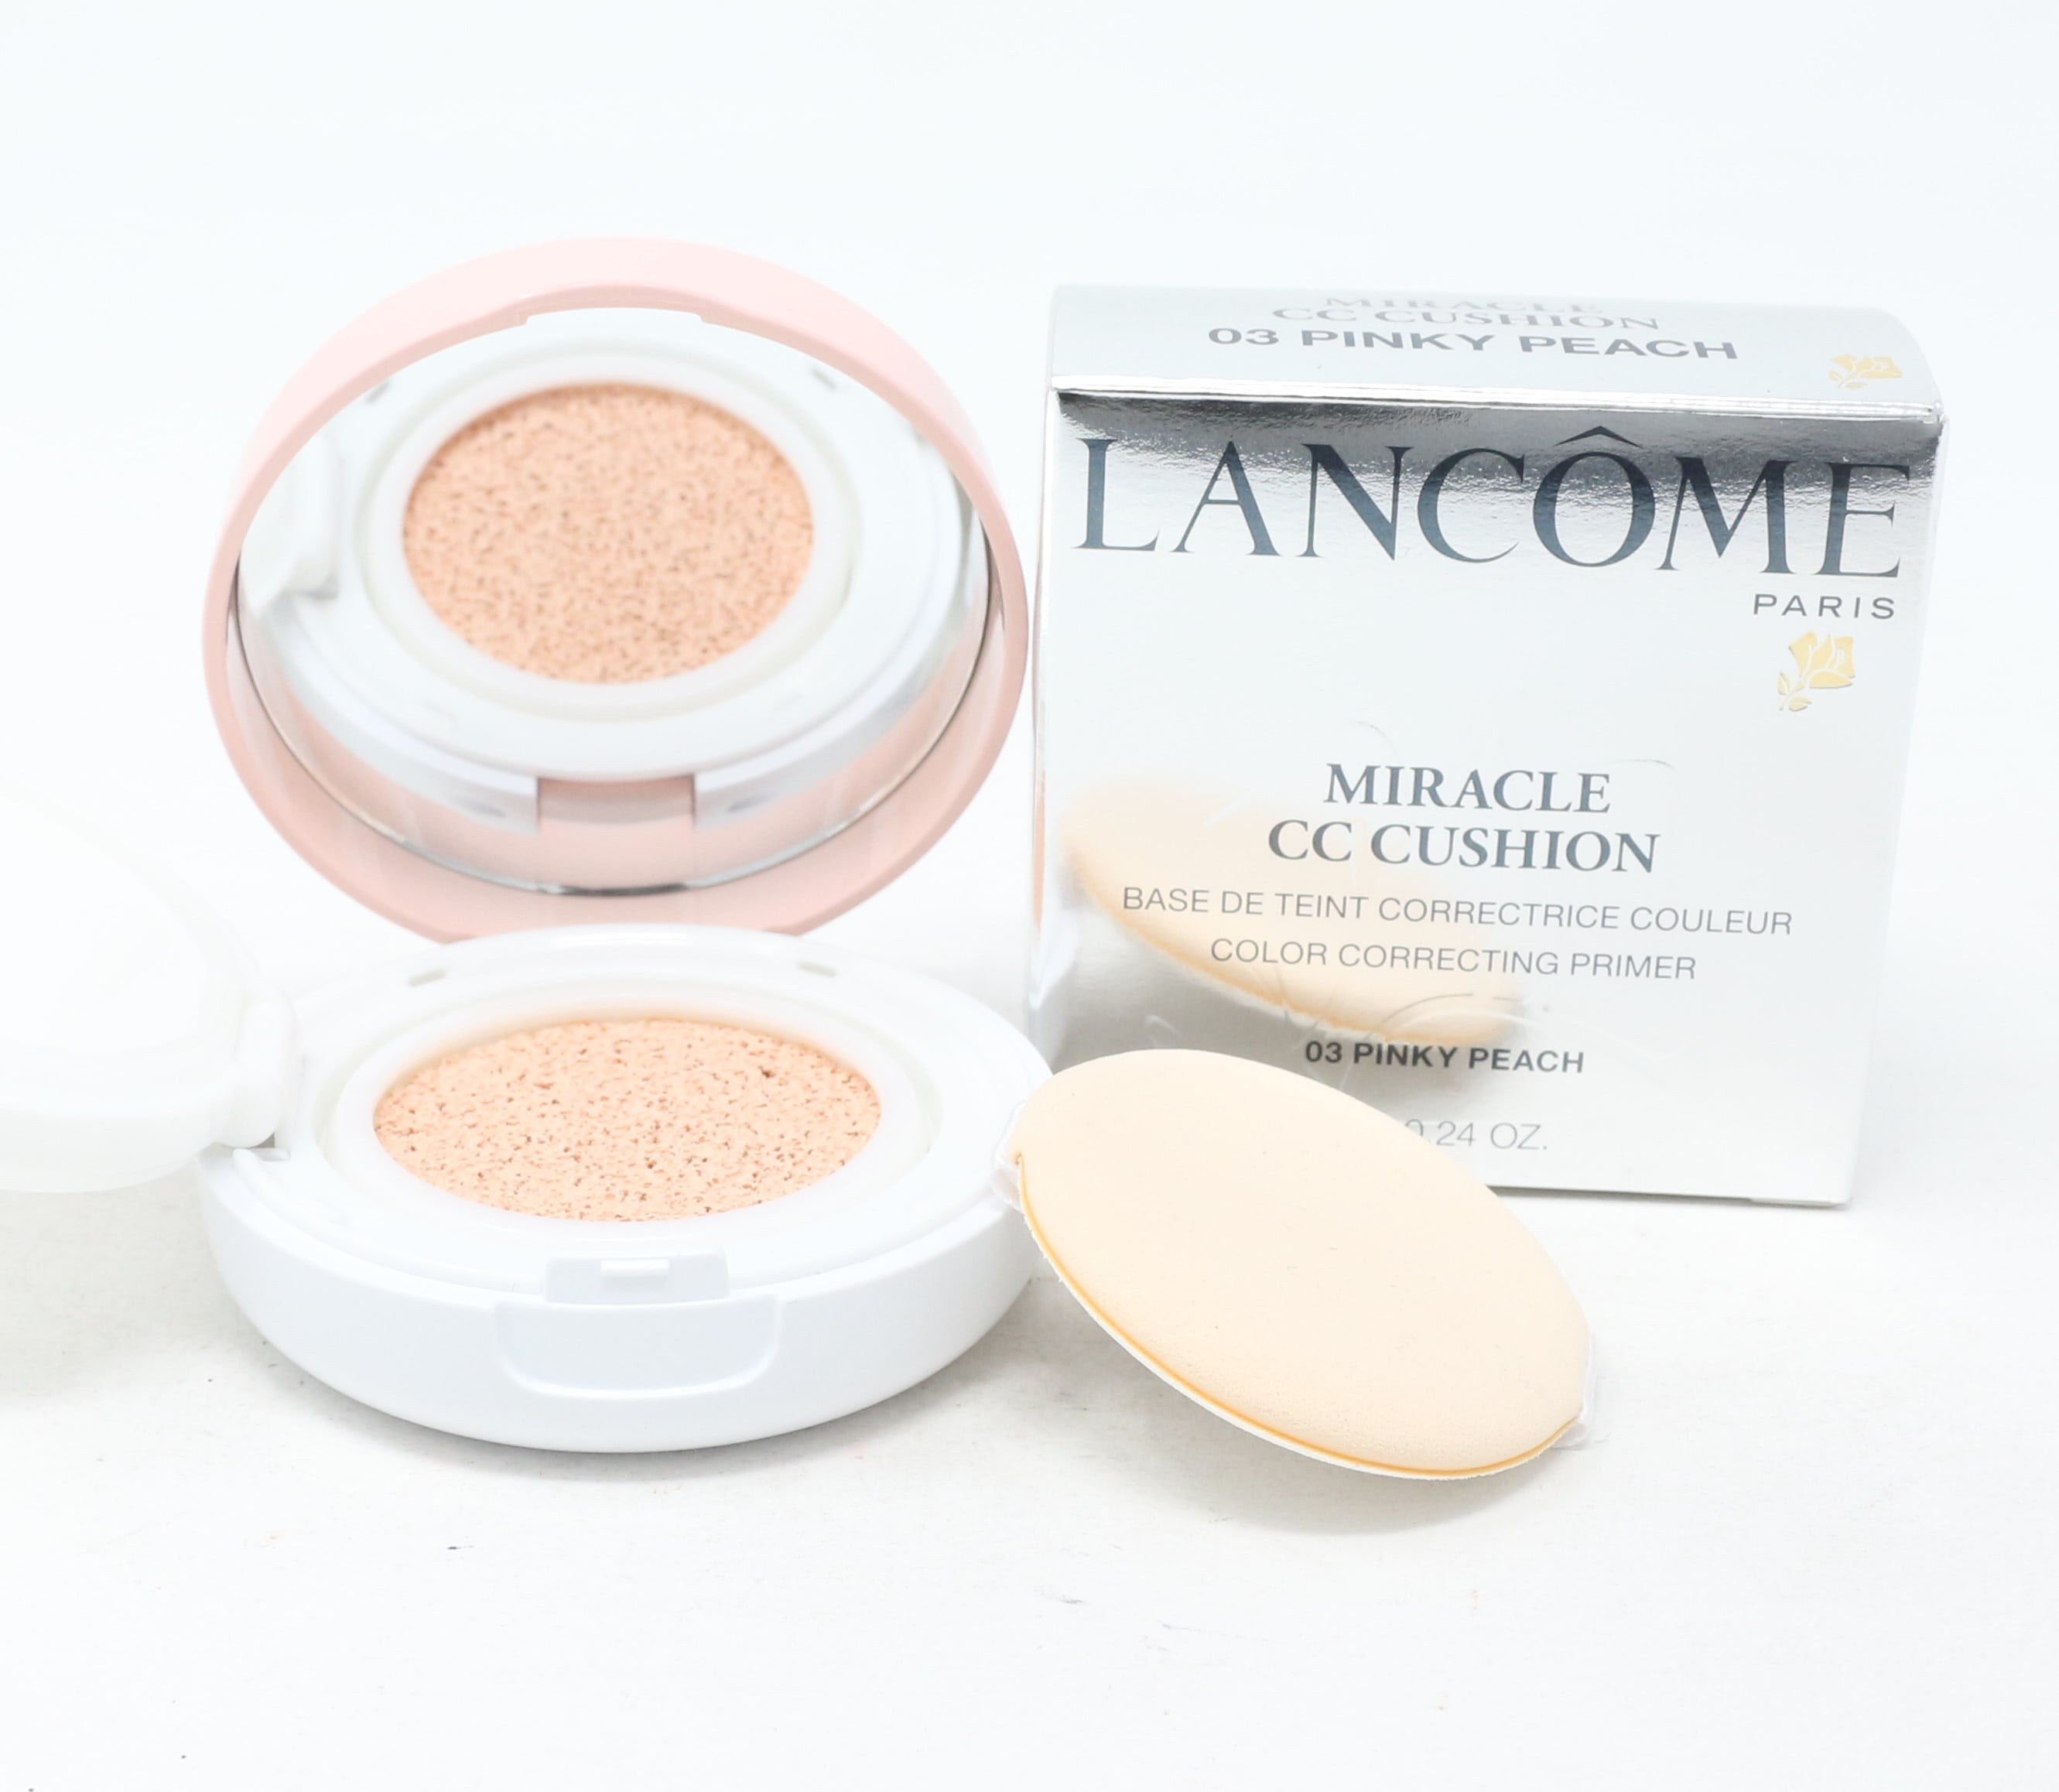 forskellige Fader fage Kenya Lancome Miracle Cc Cushion Color Correcting Primer 0.24oz 03 Pinky Peach  New - Walmart.com